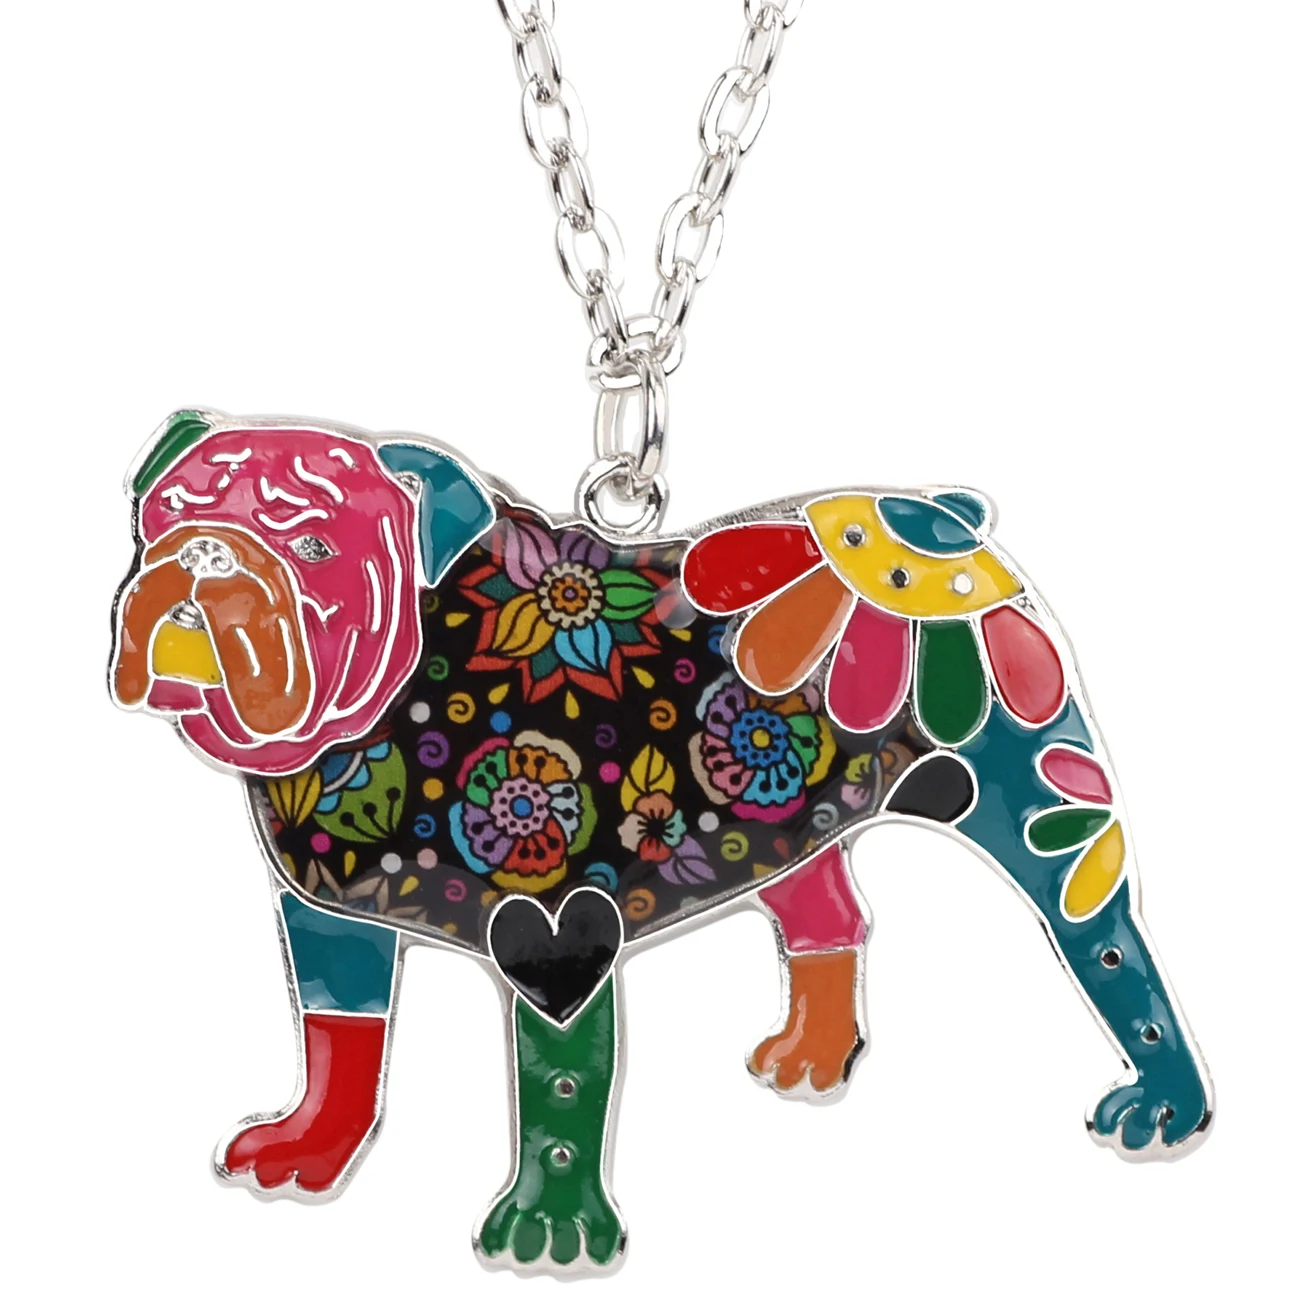 

Enamel Alloy Floral British Bulldog Necklace Dog Pets Pendant Chain Fashion Animals Jewelry For Women Girls Teens Charms Gifts, Multicolor blue black purple red brown